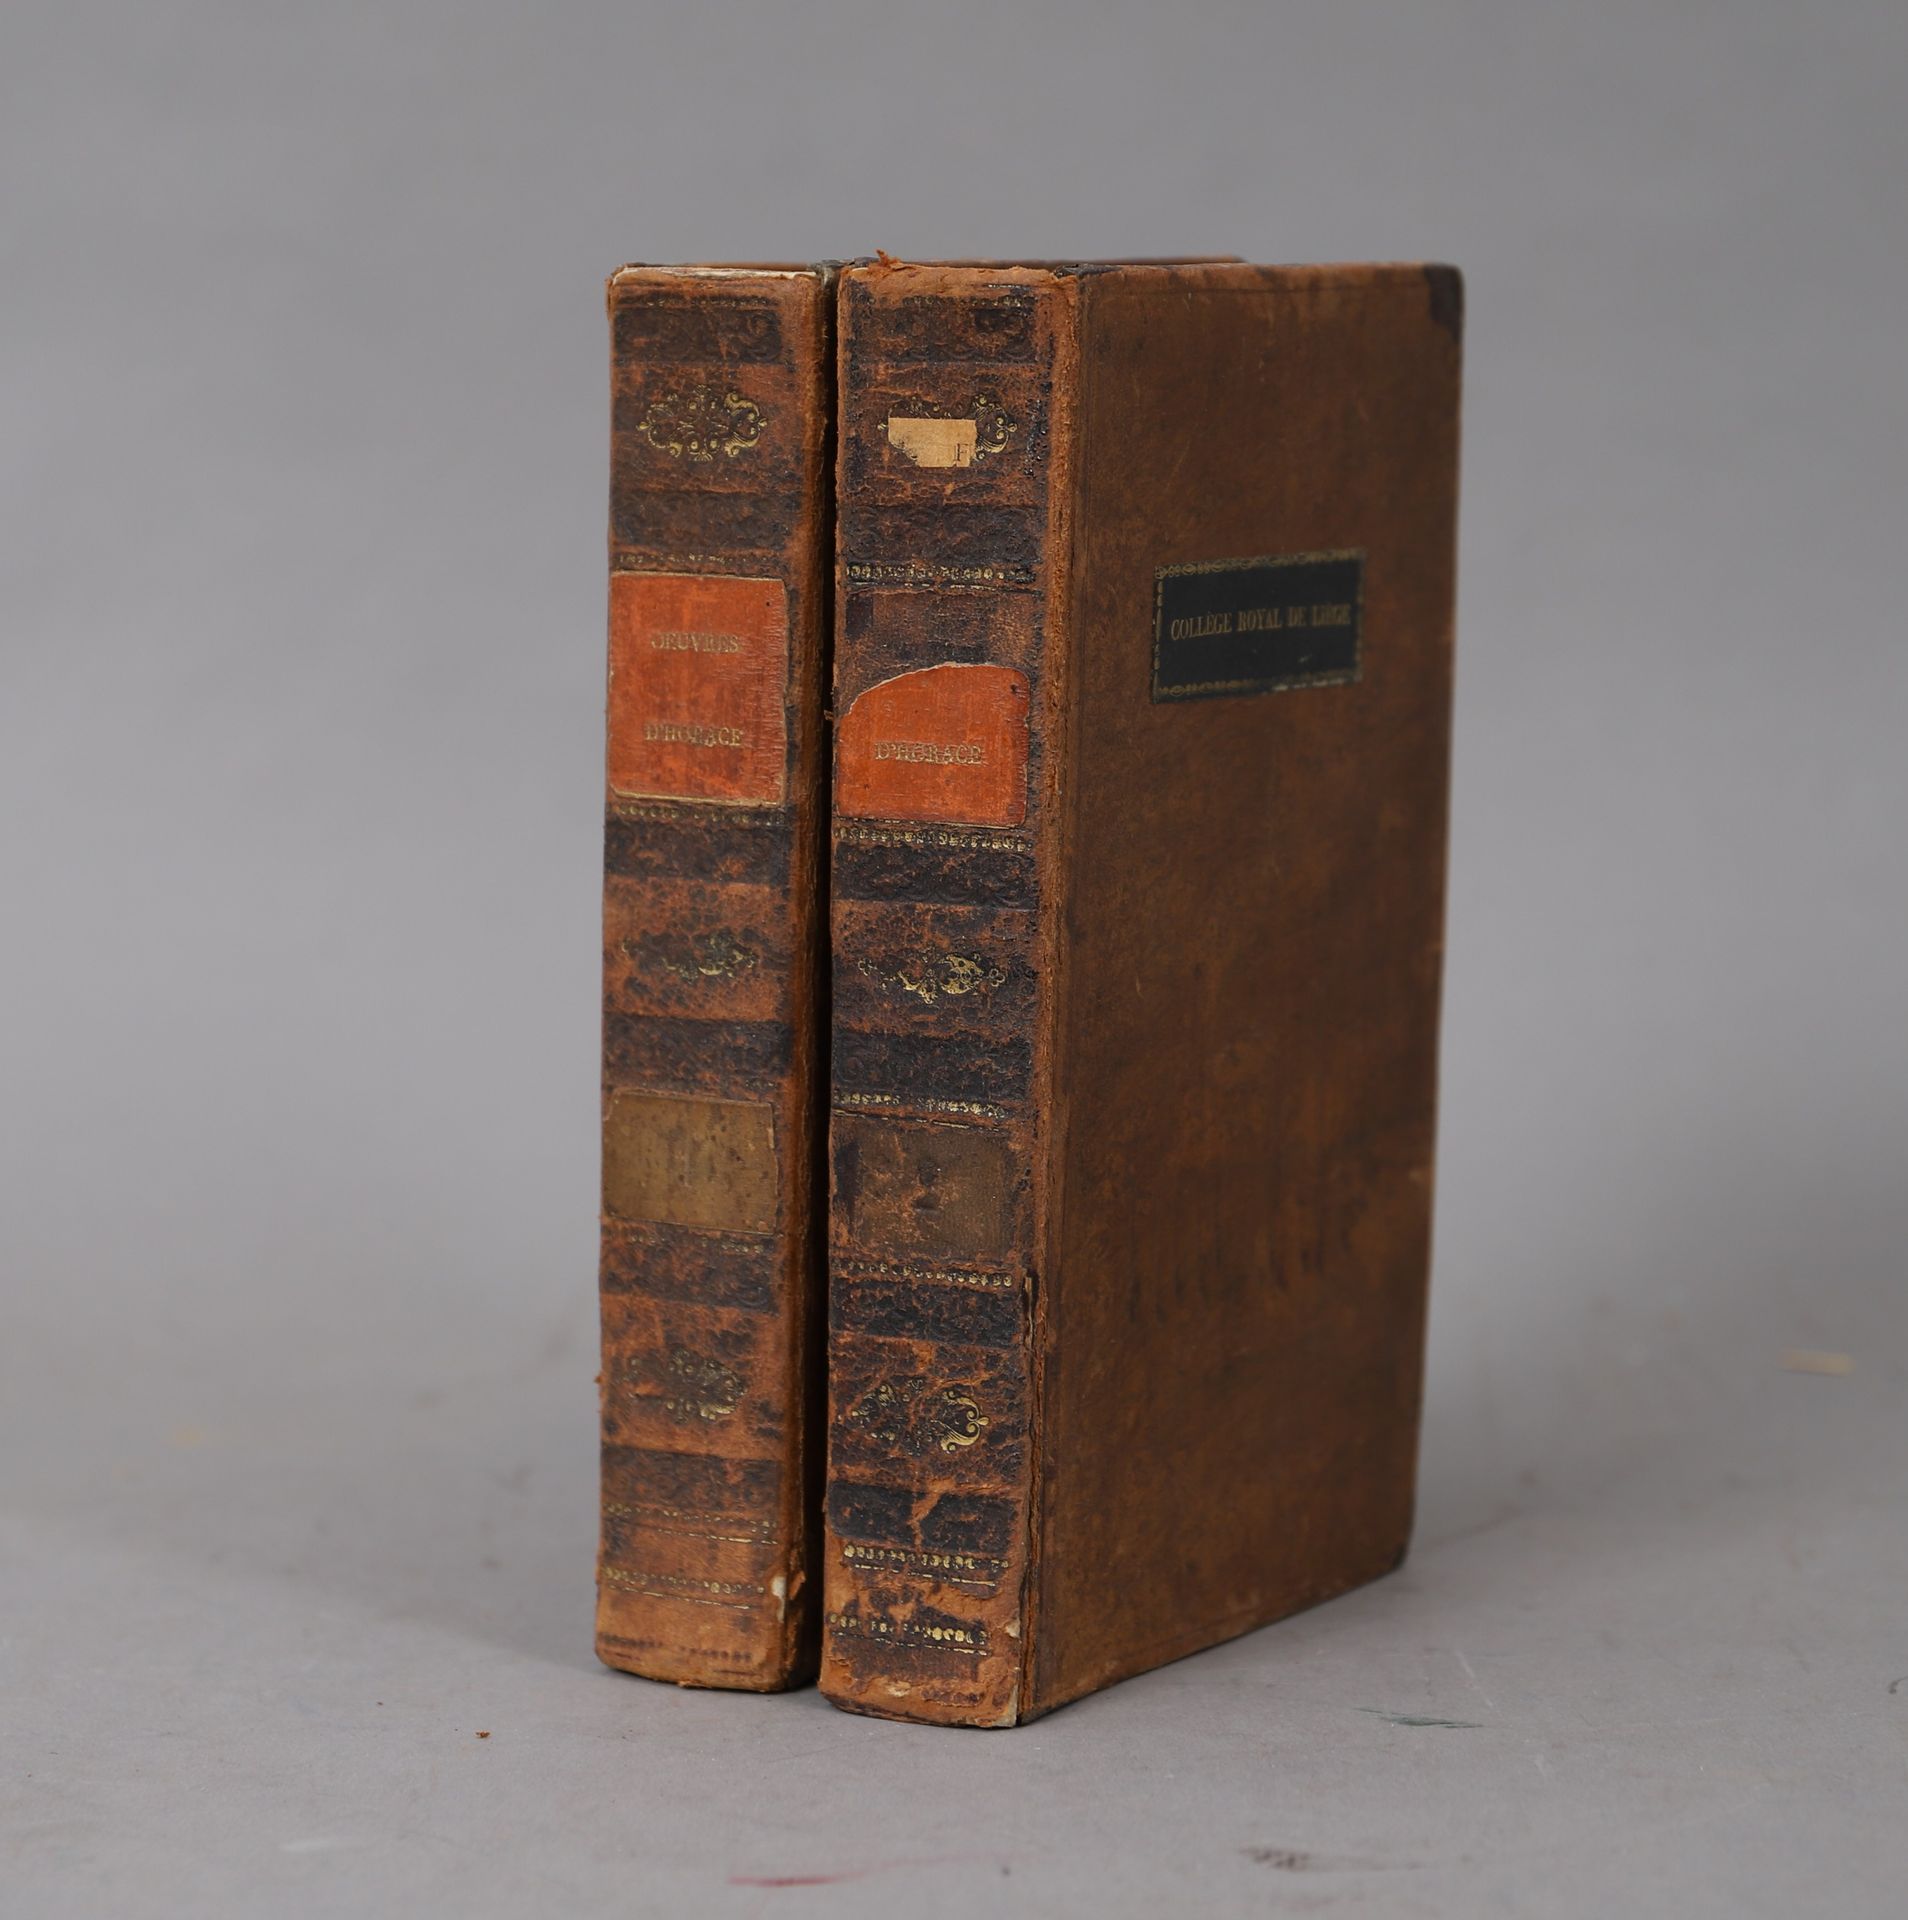 Null works of horace

1823

2 bound volumes.